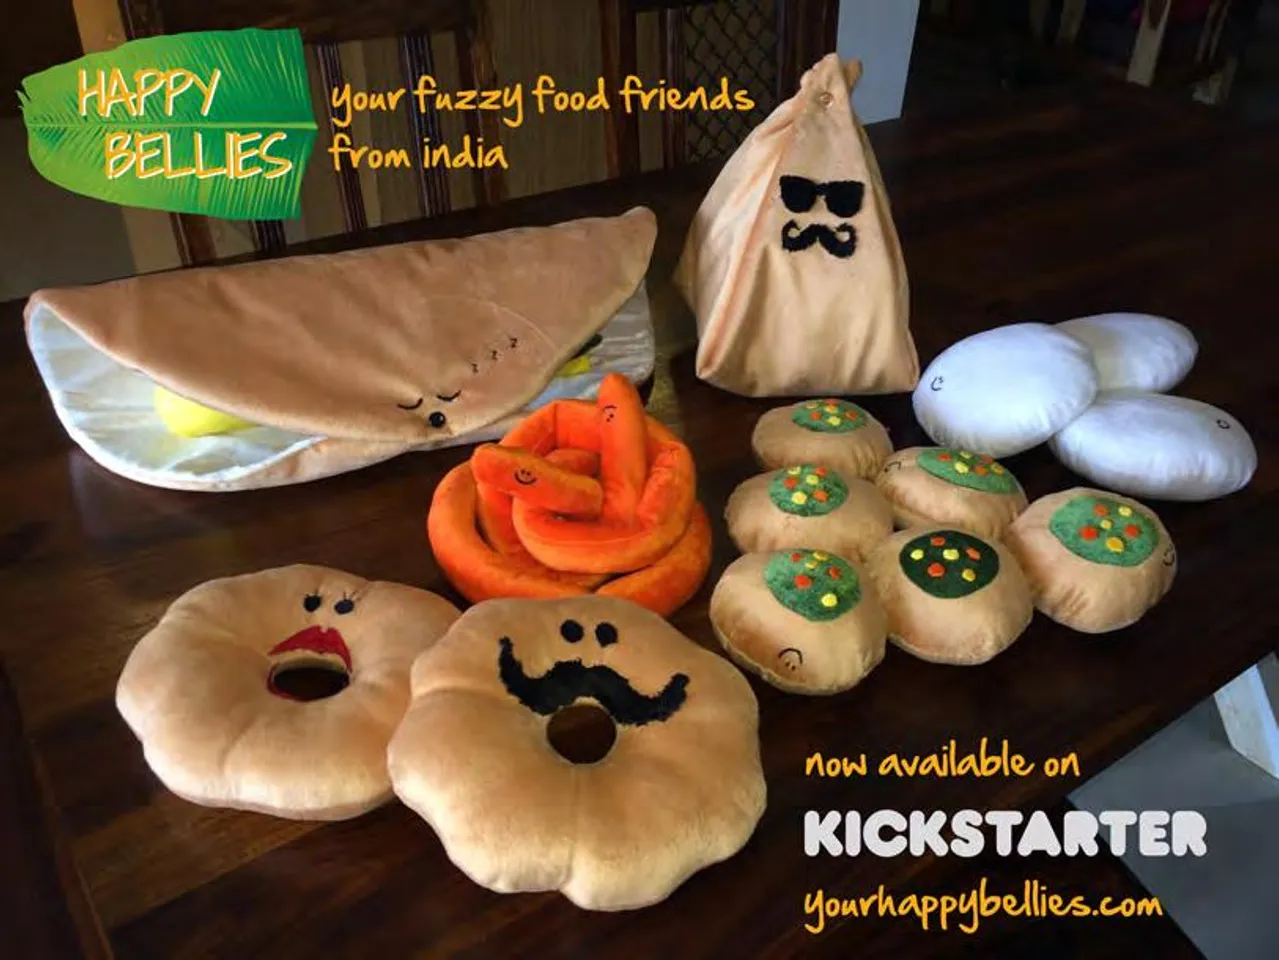 Stuffed Toys Based On Indian Foods Come To Kickstarter: Get ‘Em While They’re Hot!